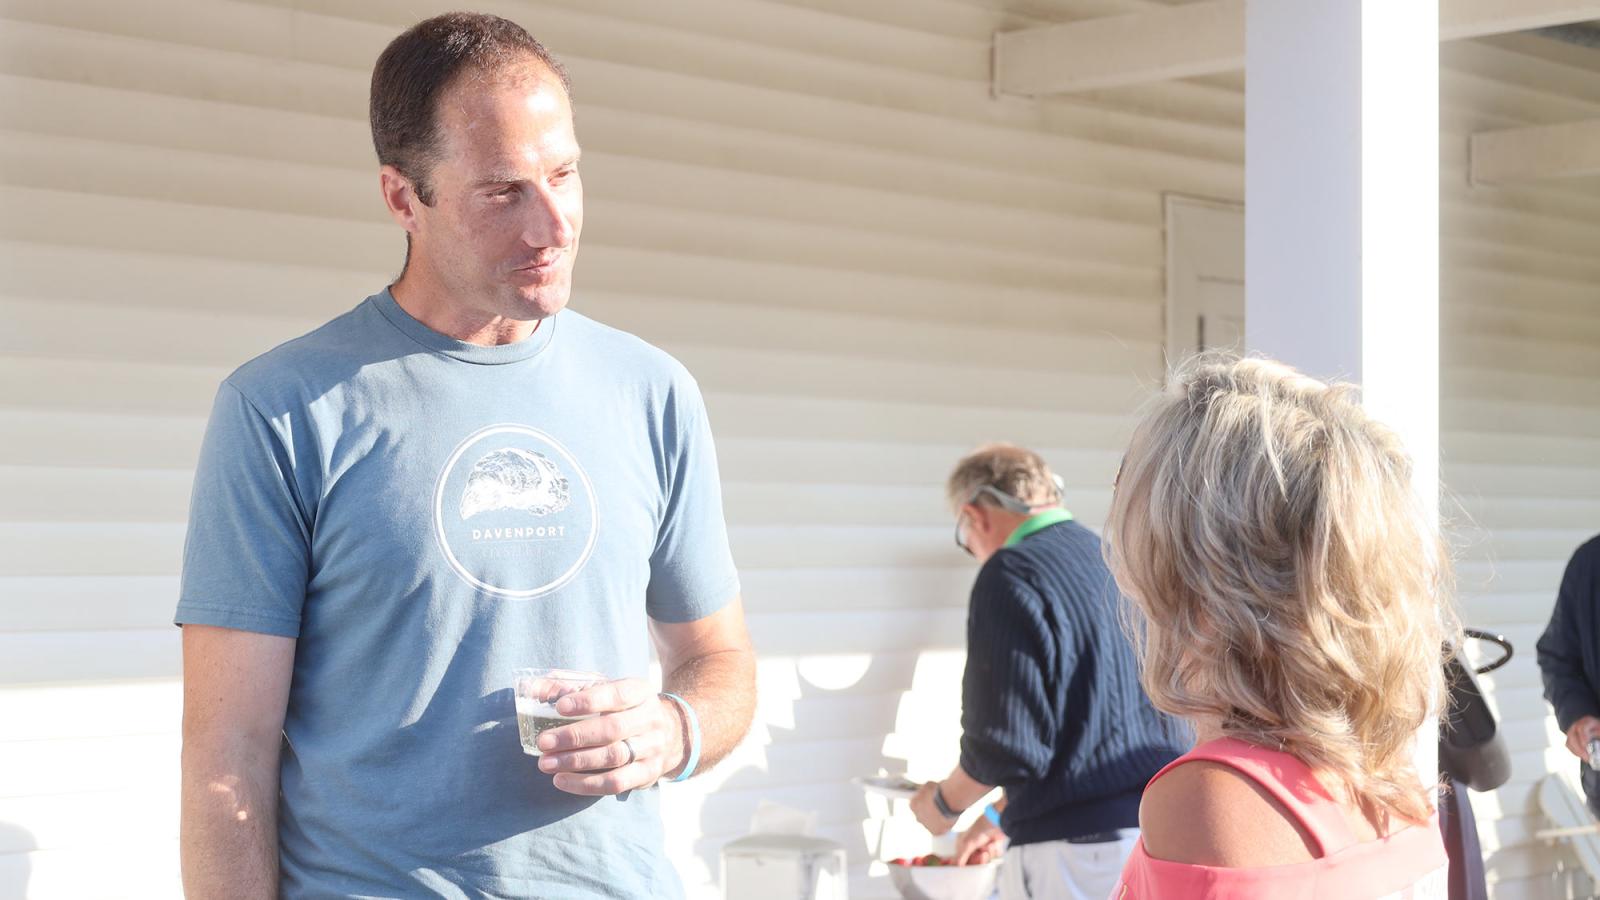 Professor Maria Luskay (right) speaks with Jamie Davenport, owner of Davenport Oyster Company in Dennis, MA.